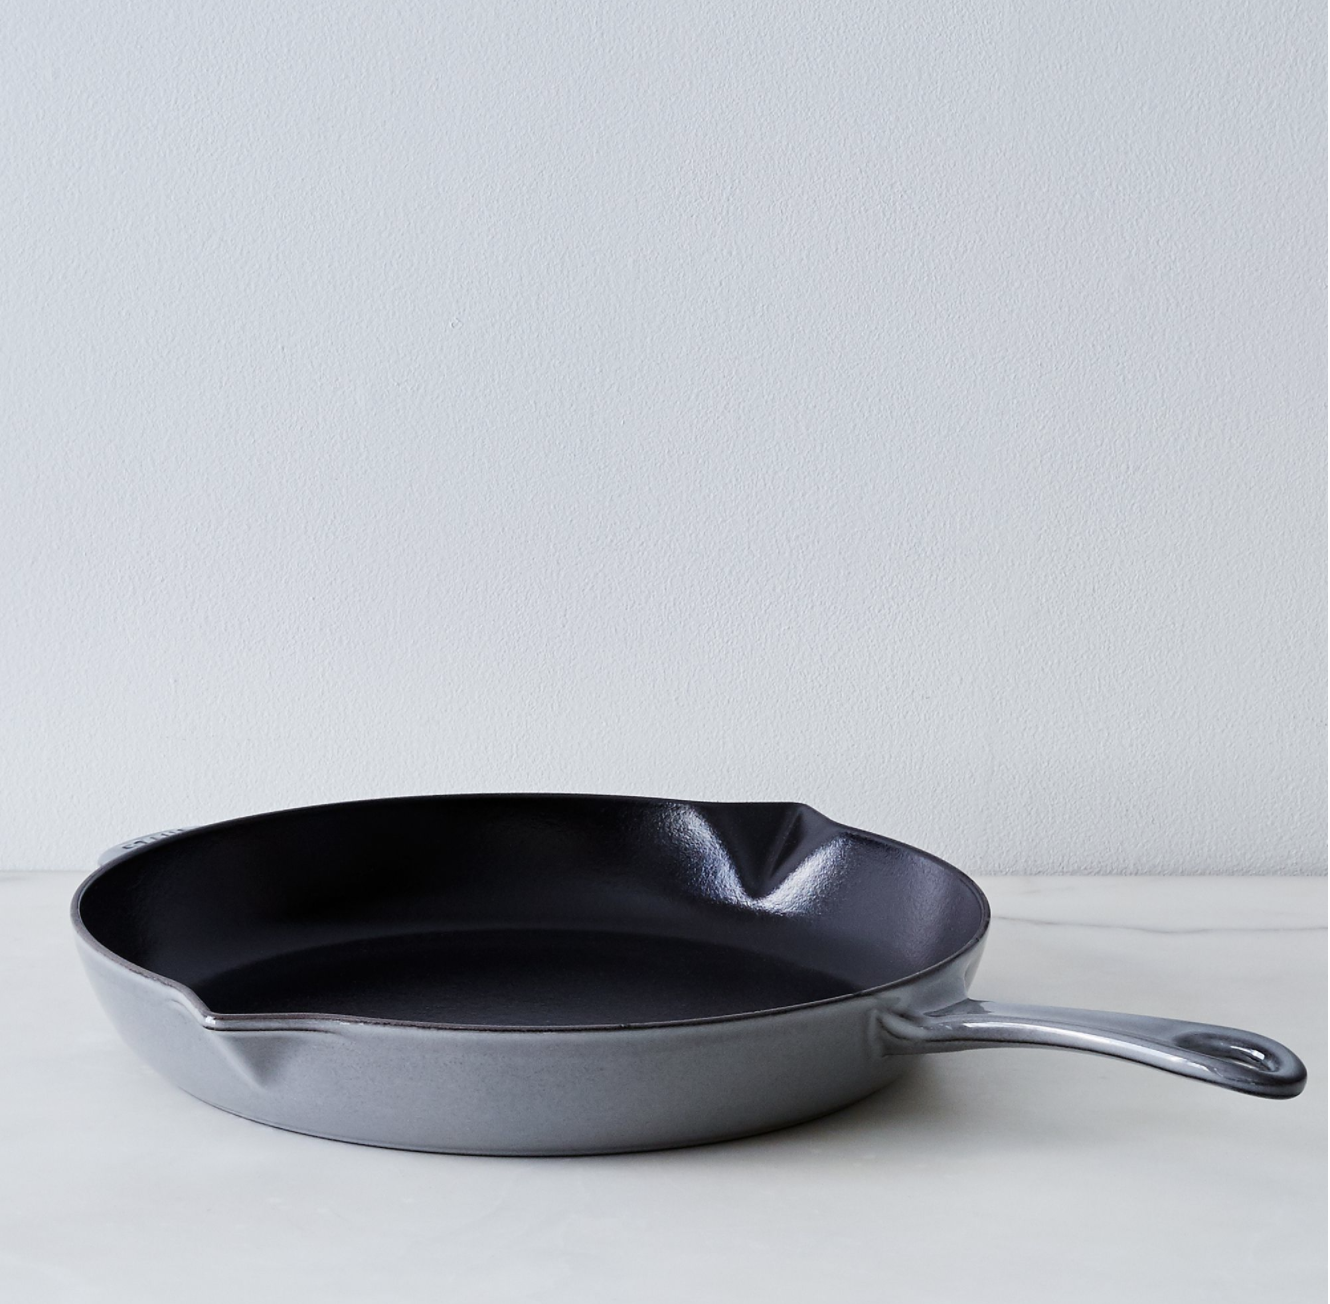 Staub 12 Inch Fry Pan in Graphite